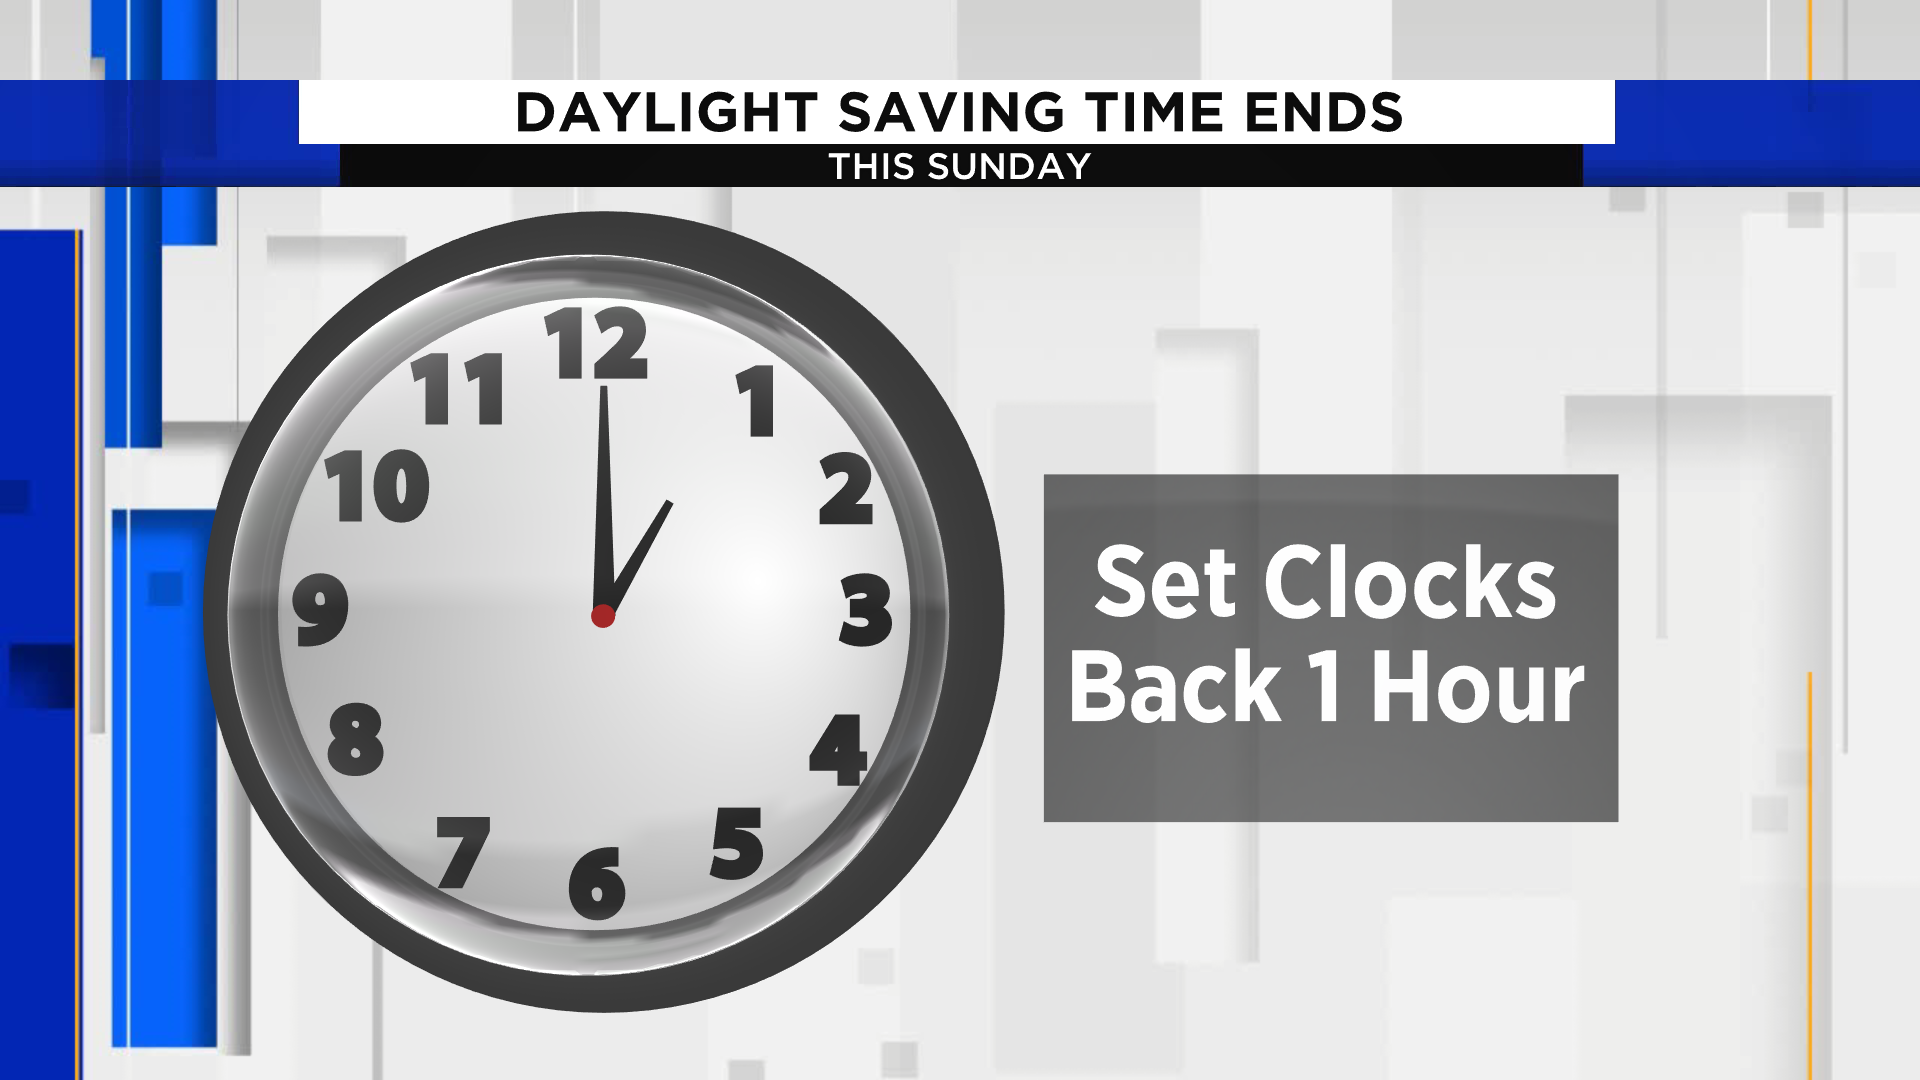 The pros and cons of daylight saving